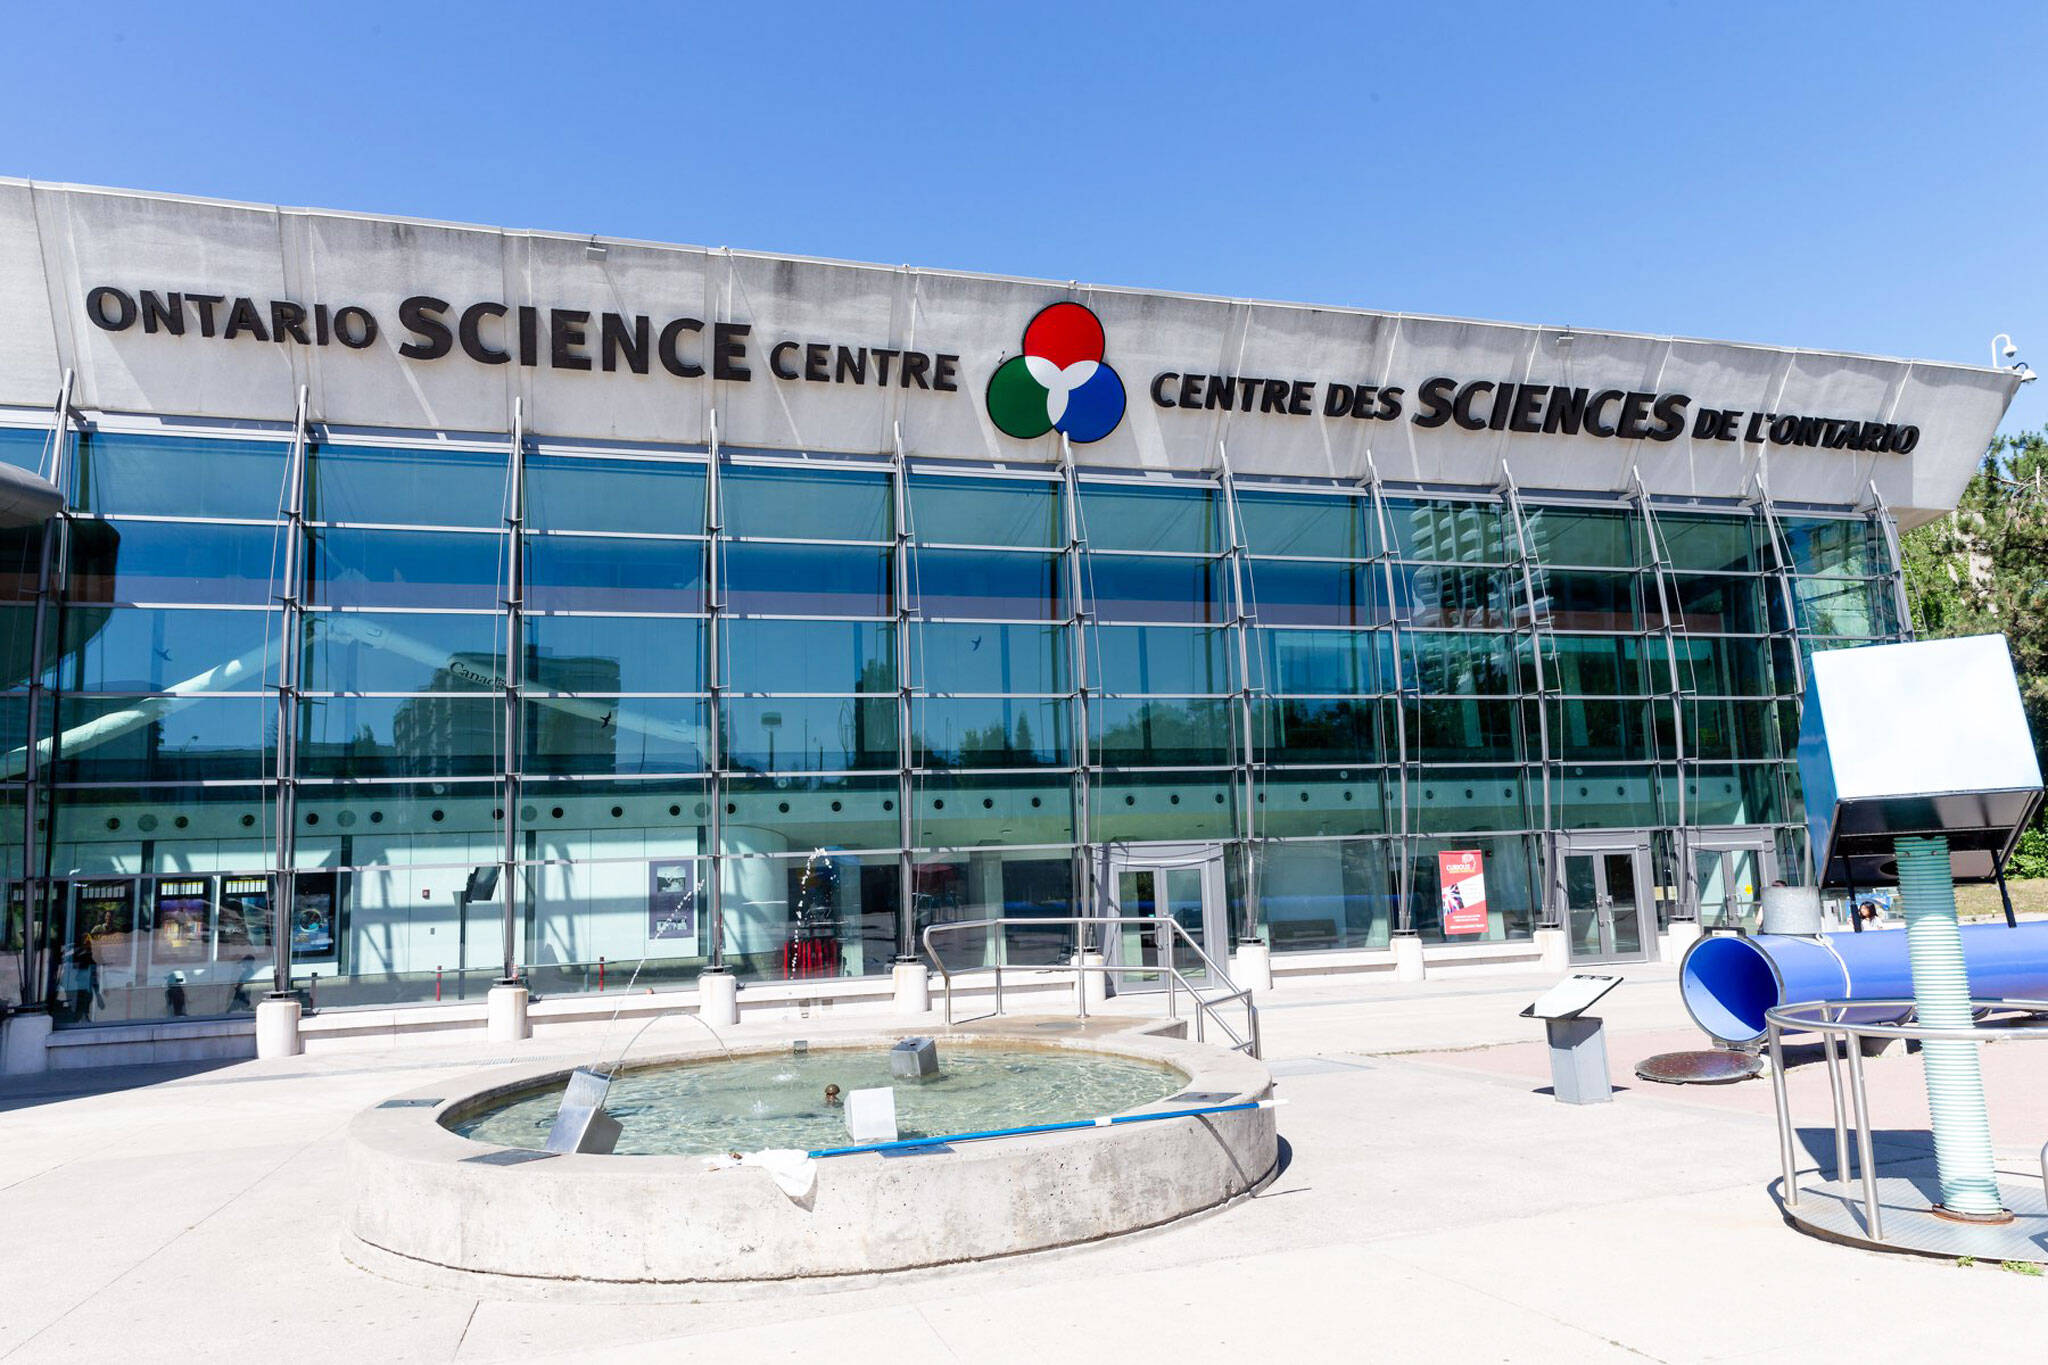 The Ontario Science Centre will be totally free this weekend